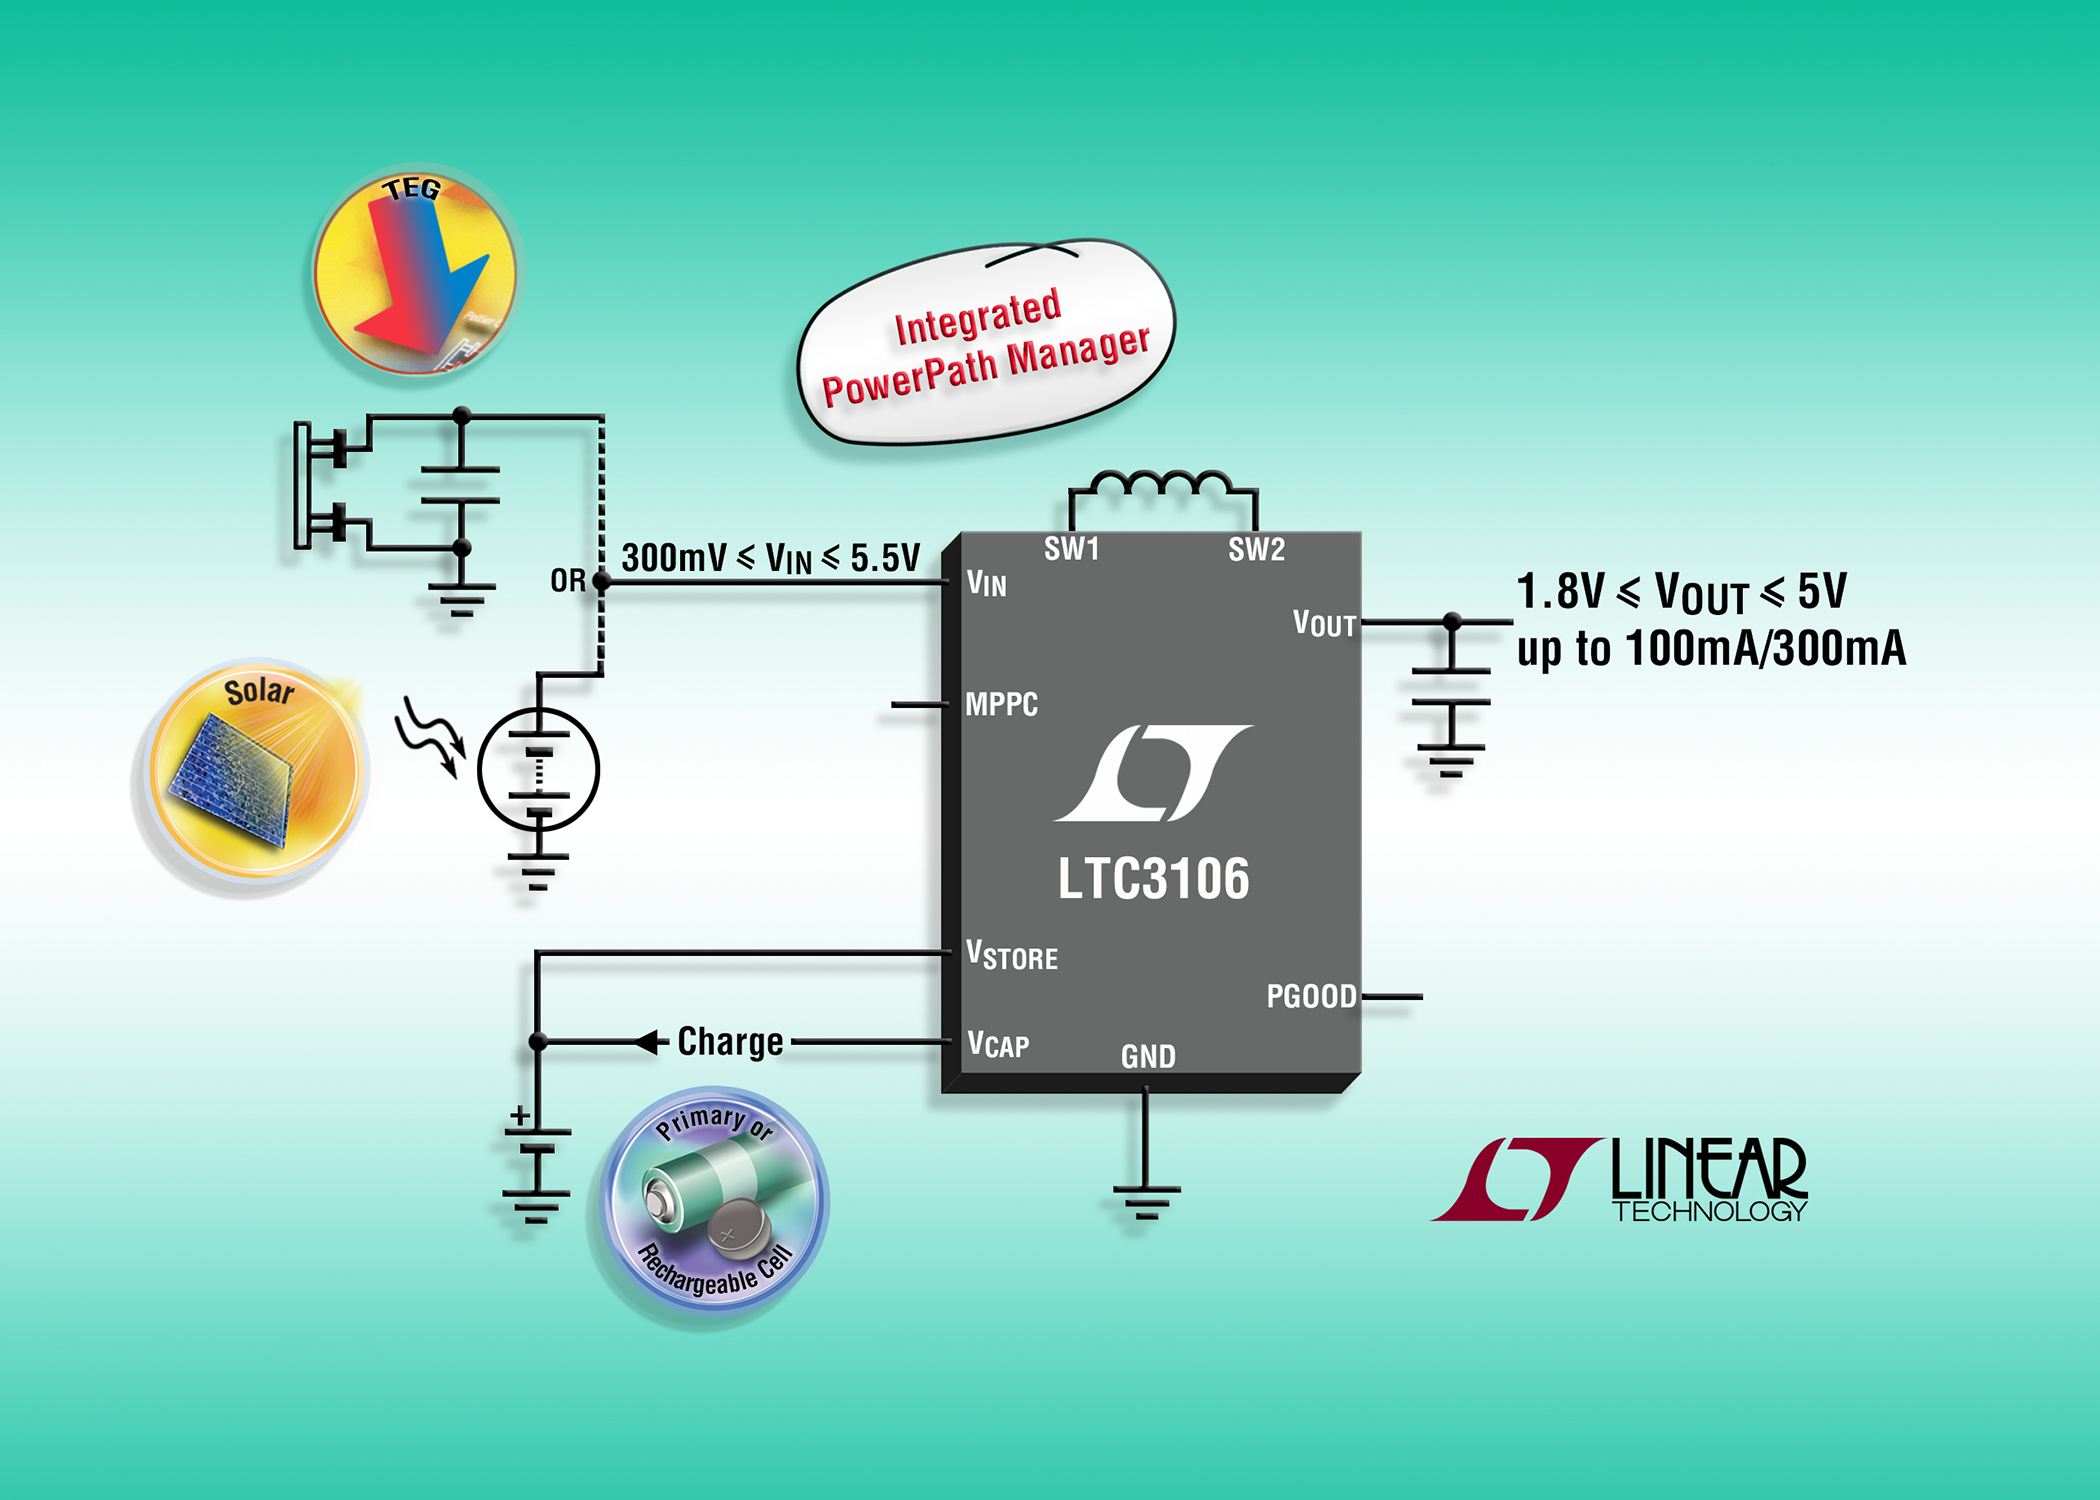 Synchronous buck-boost DC:DC converter for low-power wireless sensor applications